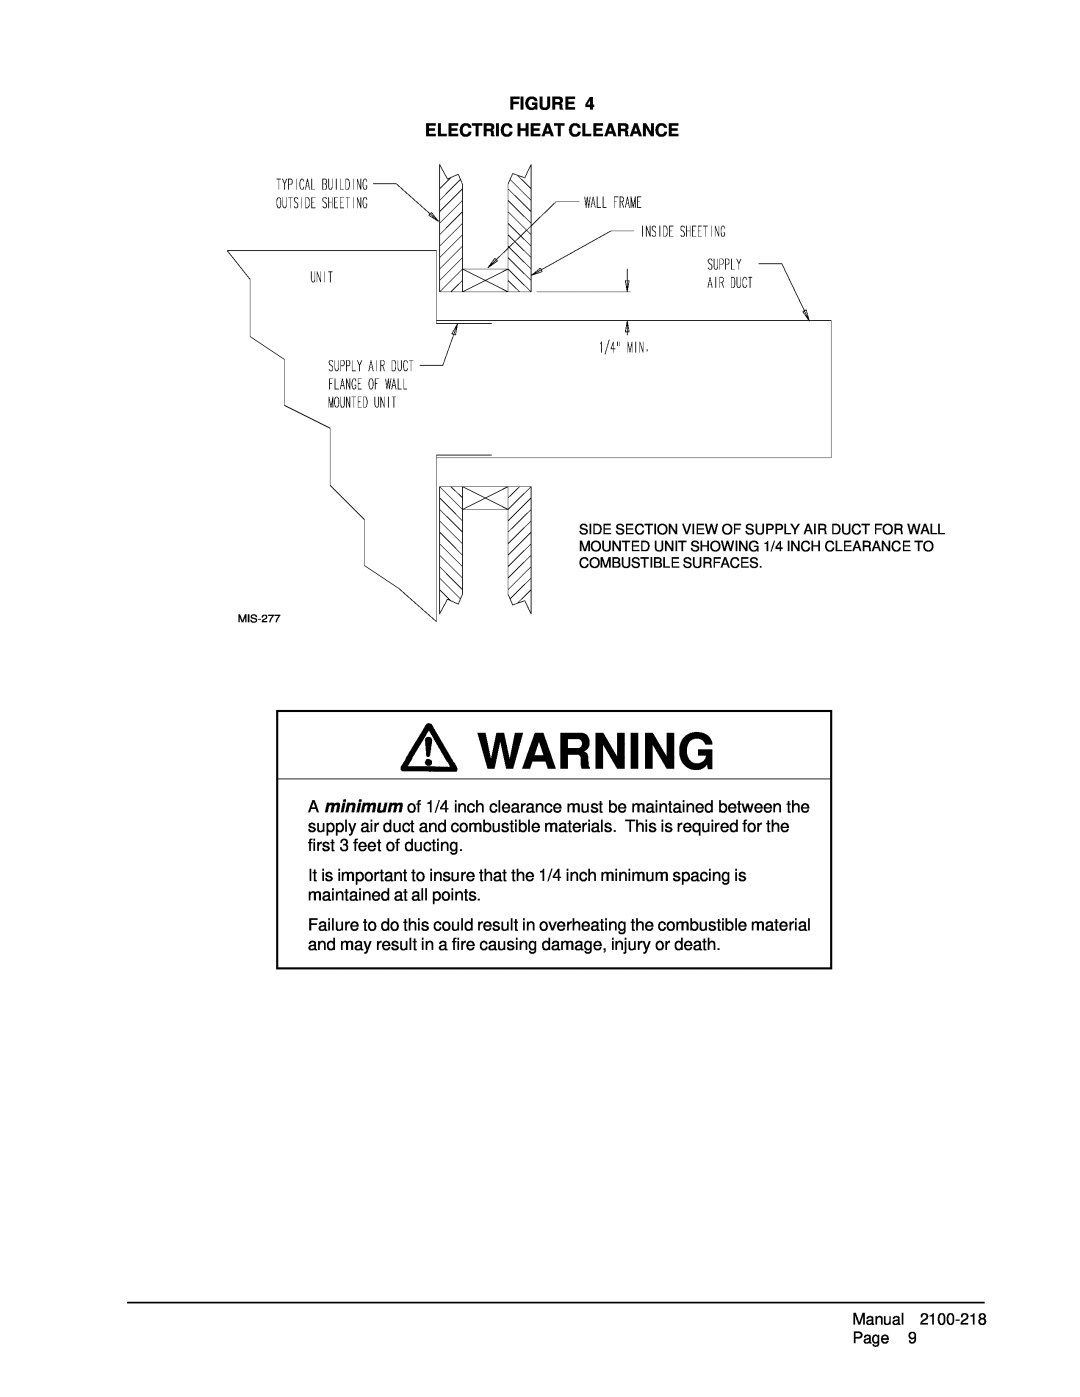 Bard WA482, WA421 Figure Electric Heat Clearance, Side Section View Of Supply Air Duct For Wall, Combustible Surfaces 